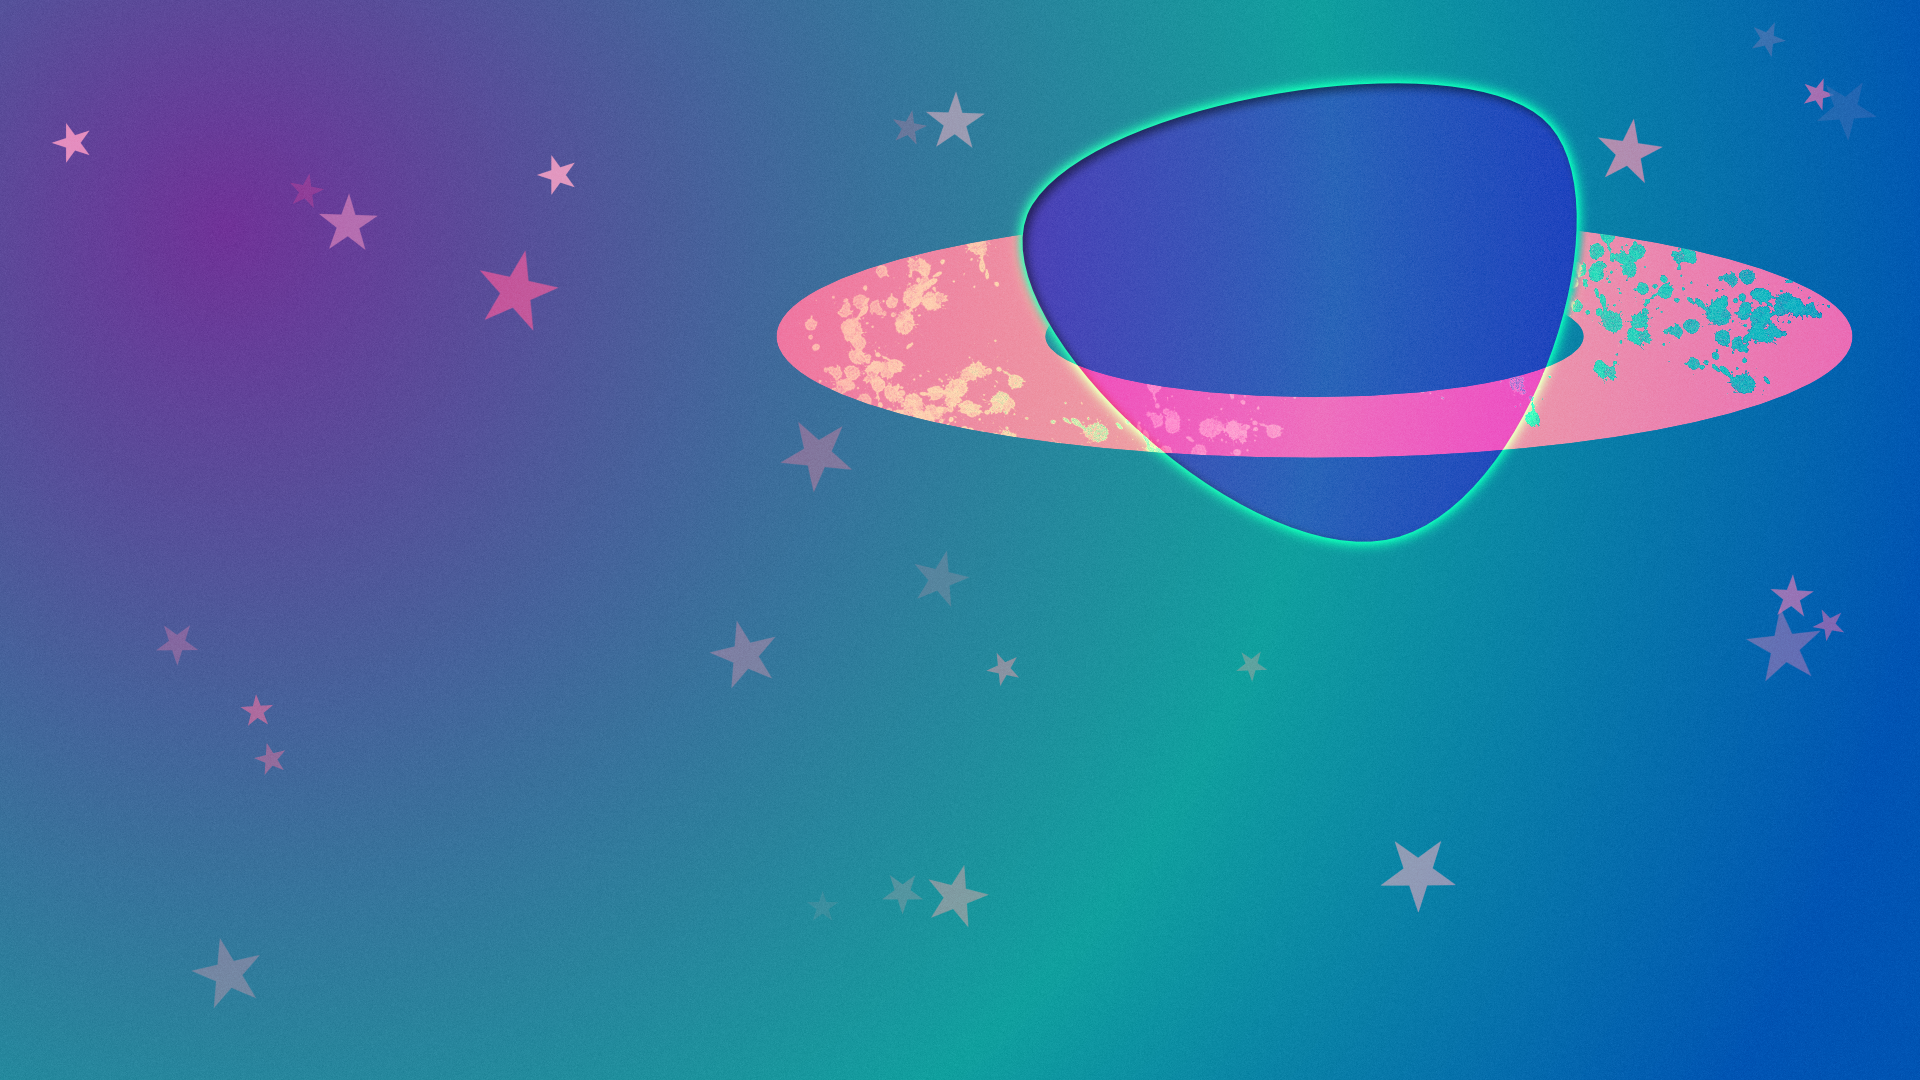 General 1920x1080 minimalism purple background gradient blue background stars space planet planetary rings